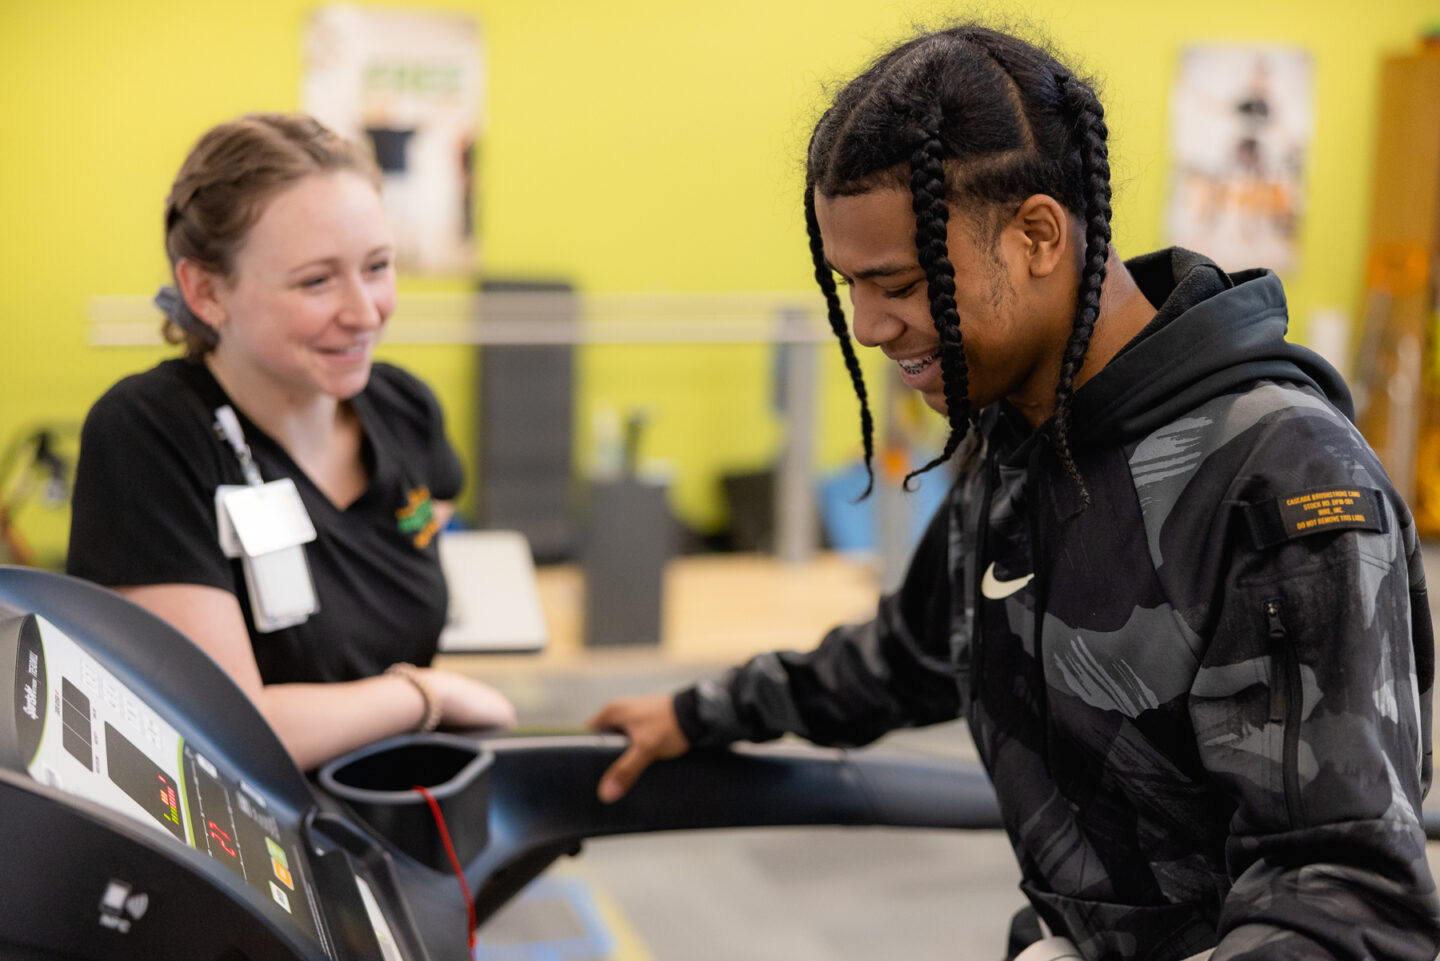 Physical therapist smiling while patient walks on a treadmill.